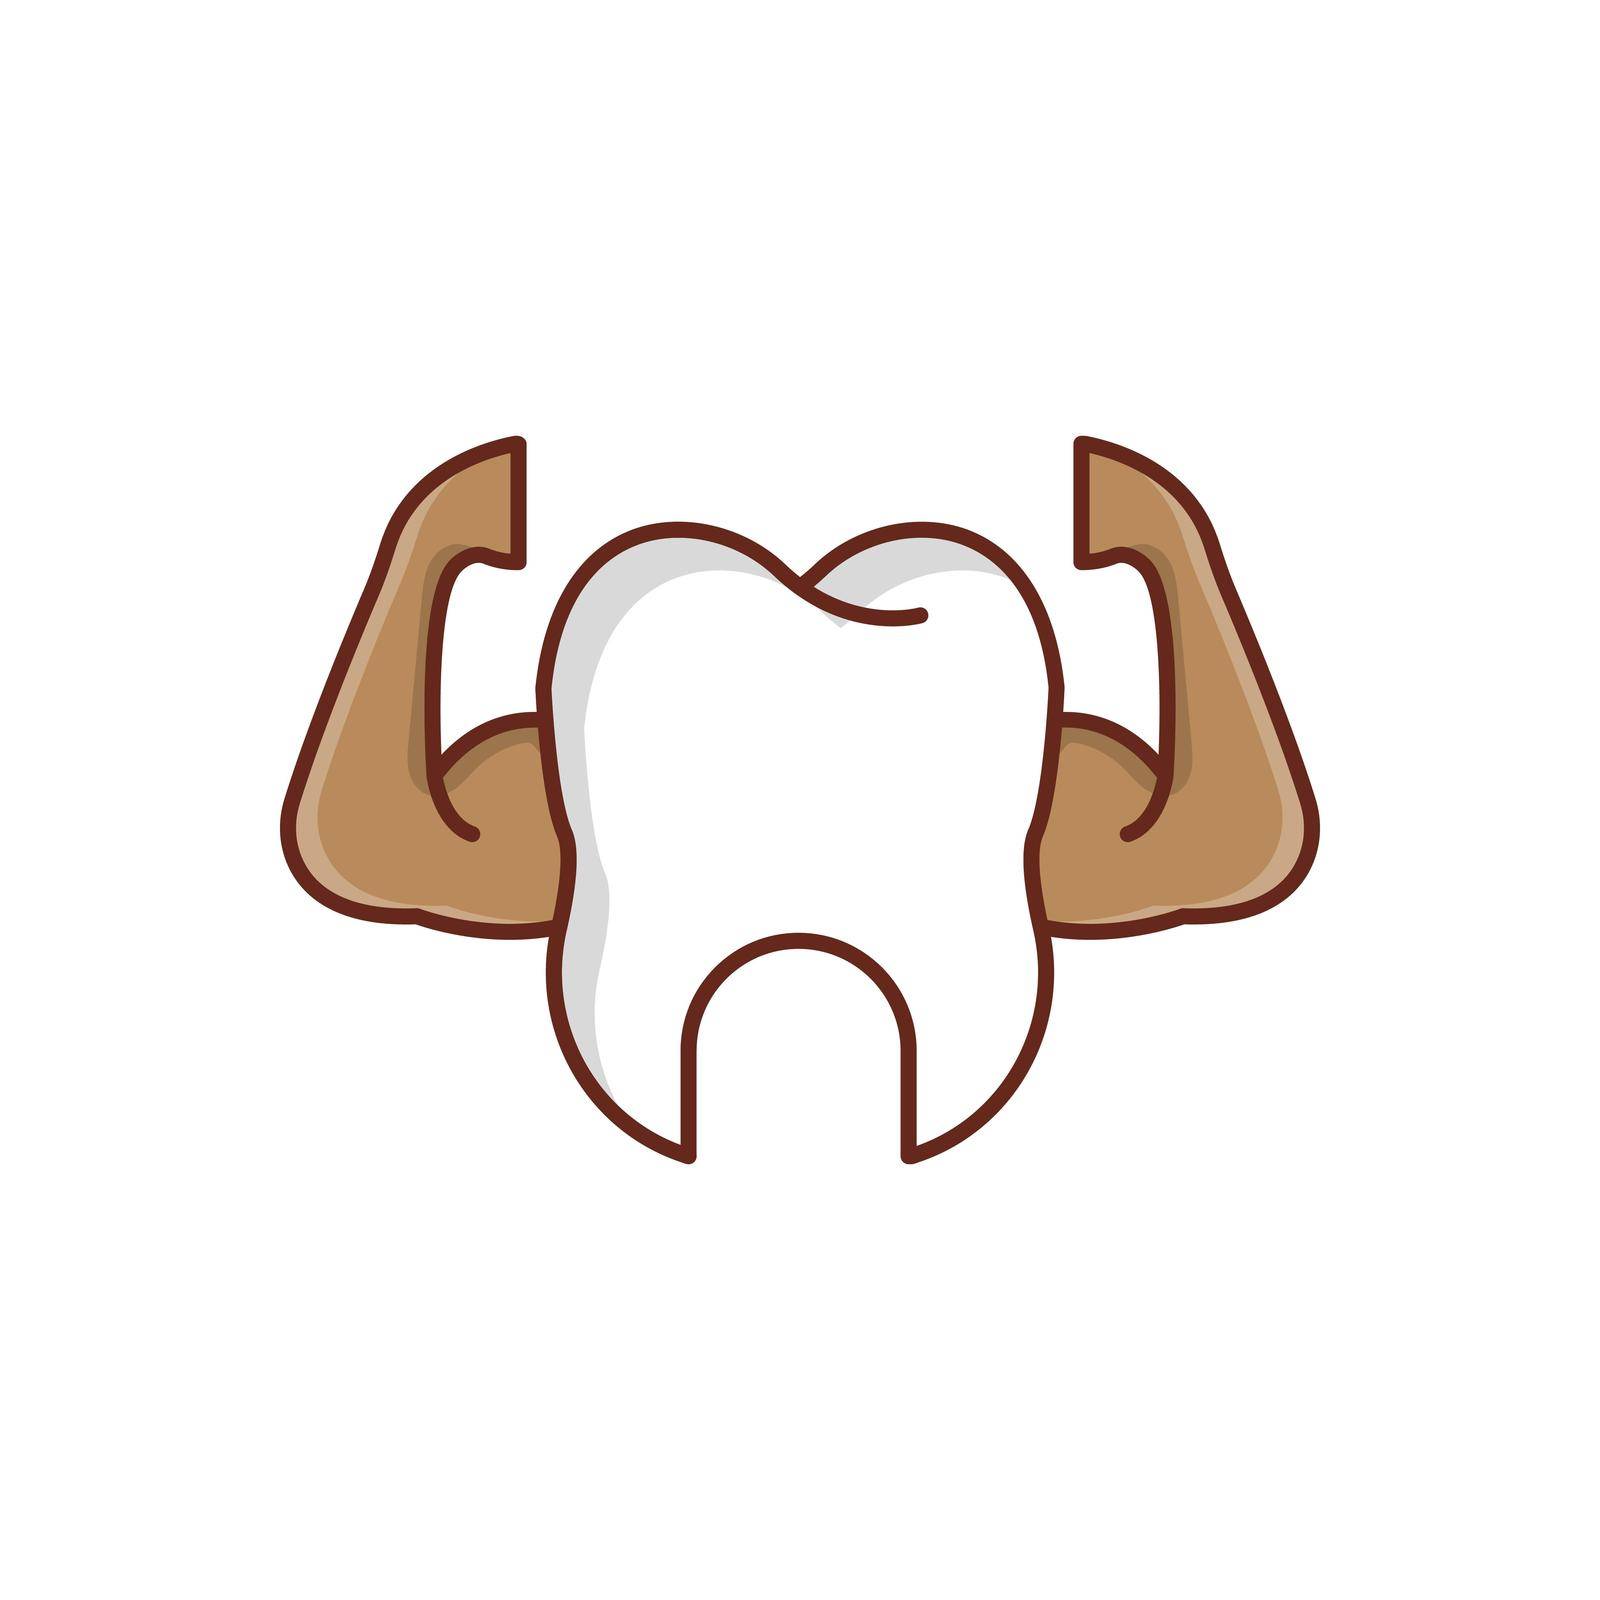 strong by FlaticonsDesign